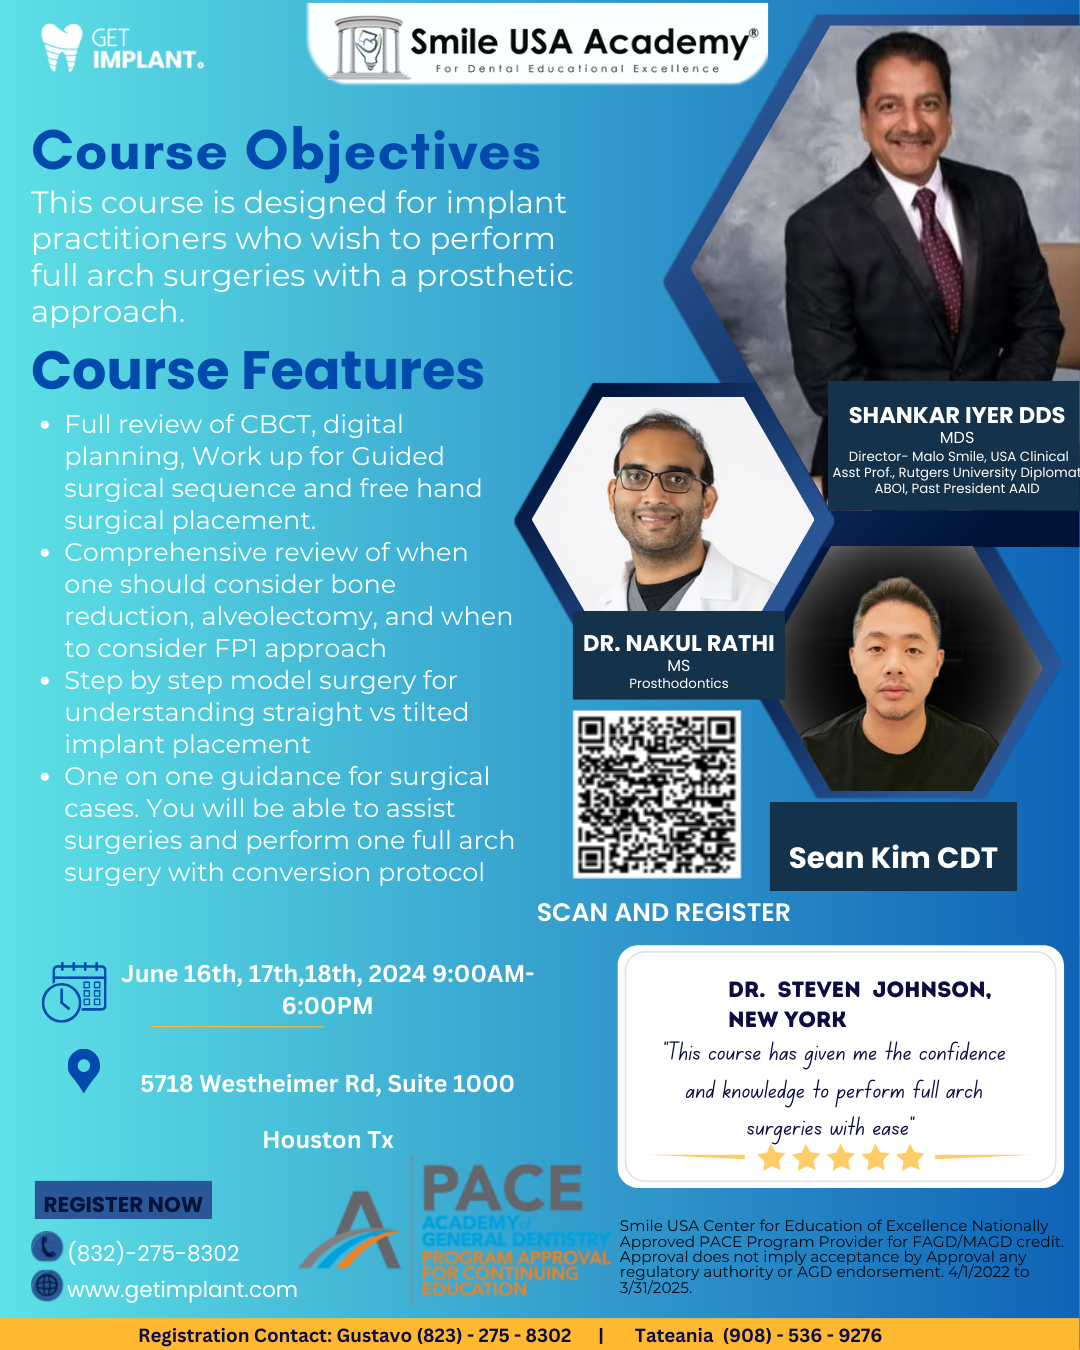 All On X Live Surgery Course: Comprehensive Surgical Training with Prosthetics - Houston